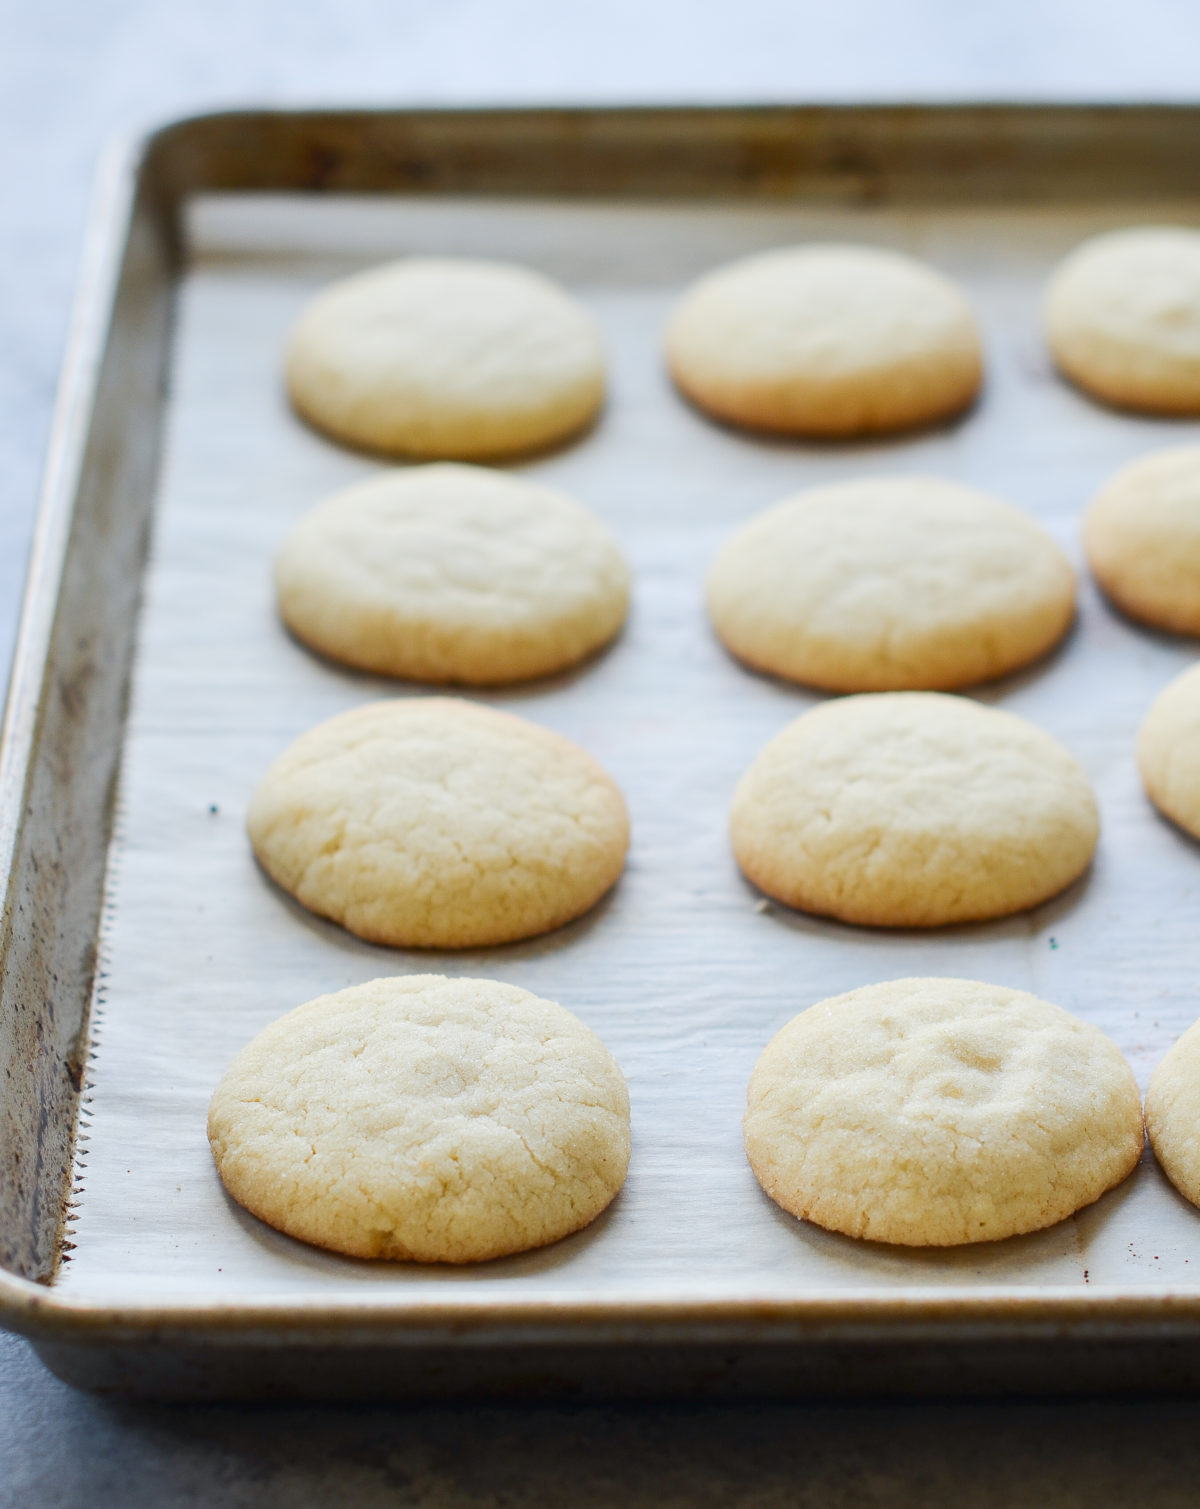 Sugar cookies on a lined baking sheet.